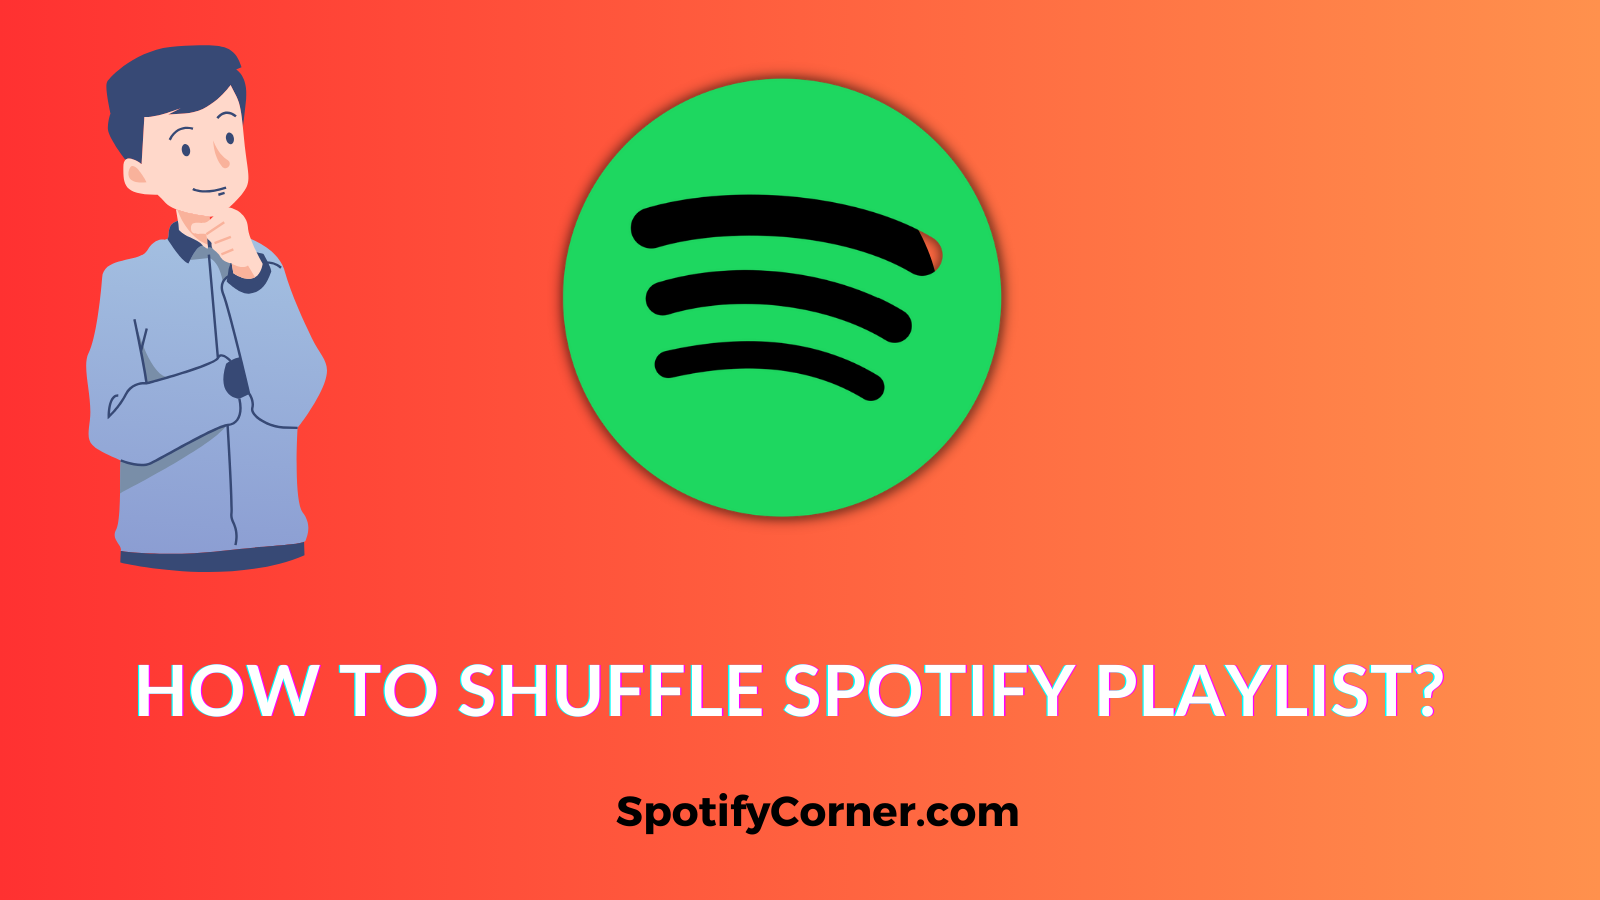 Steps for how to shuffle Spotify playlist